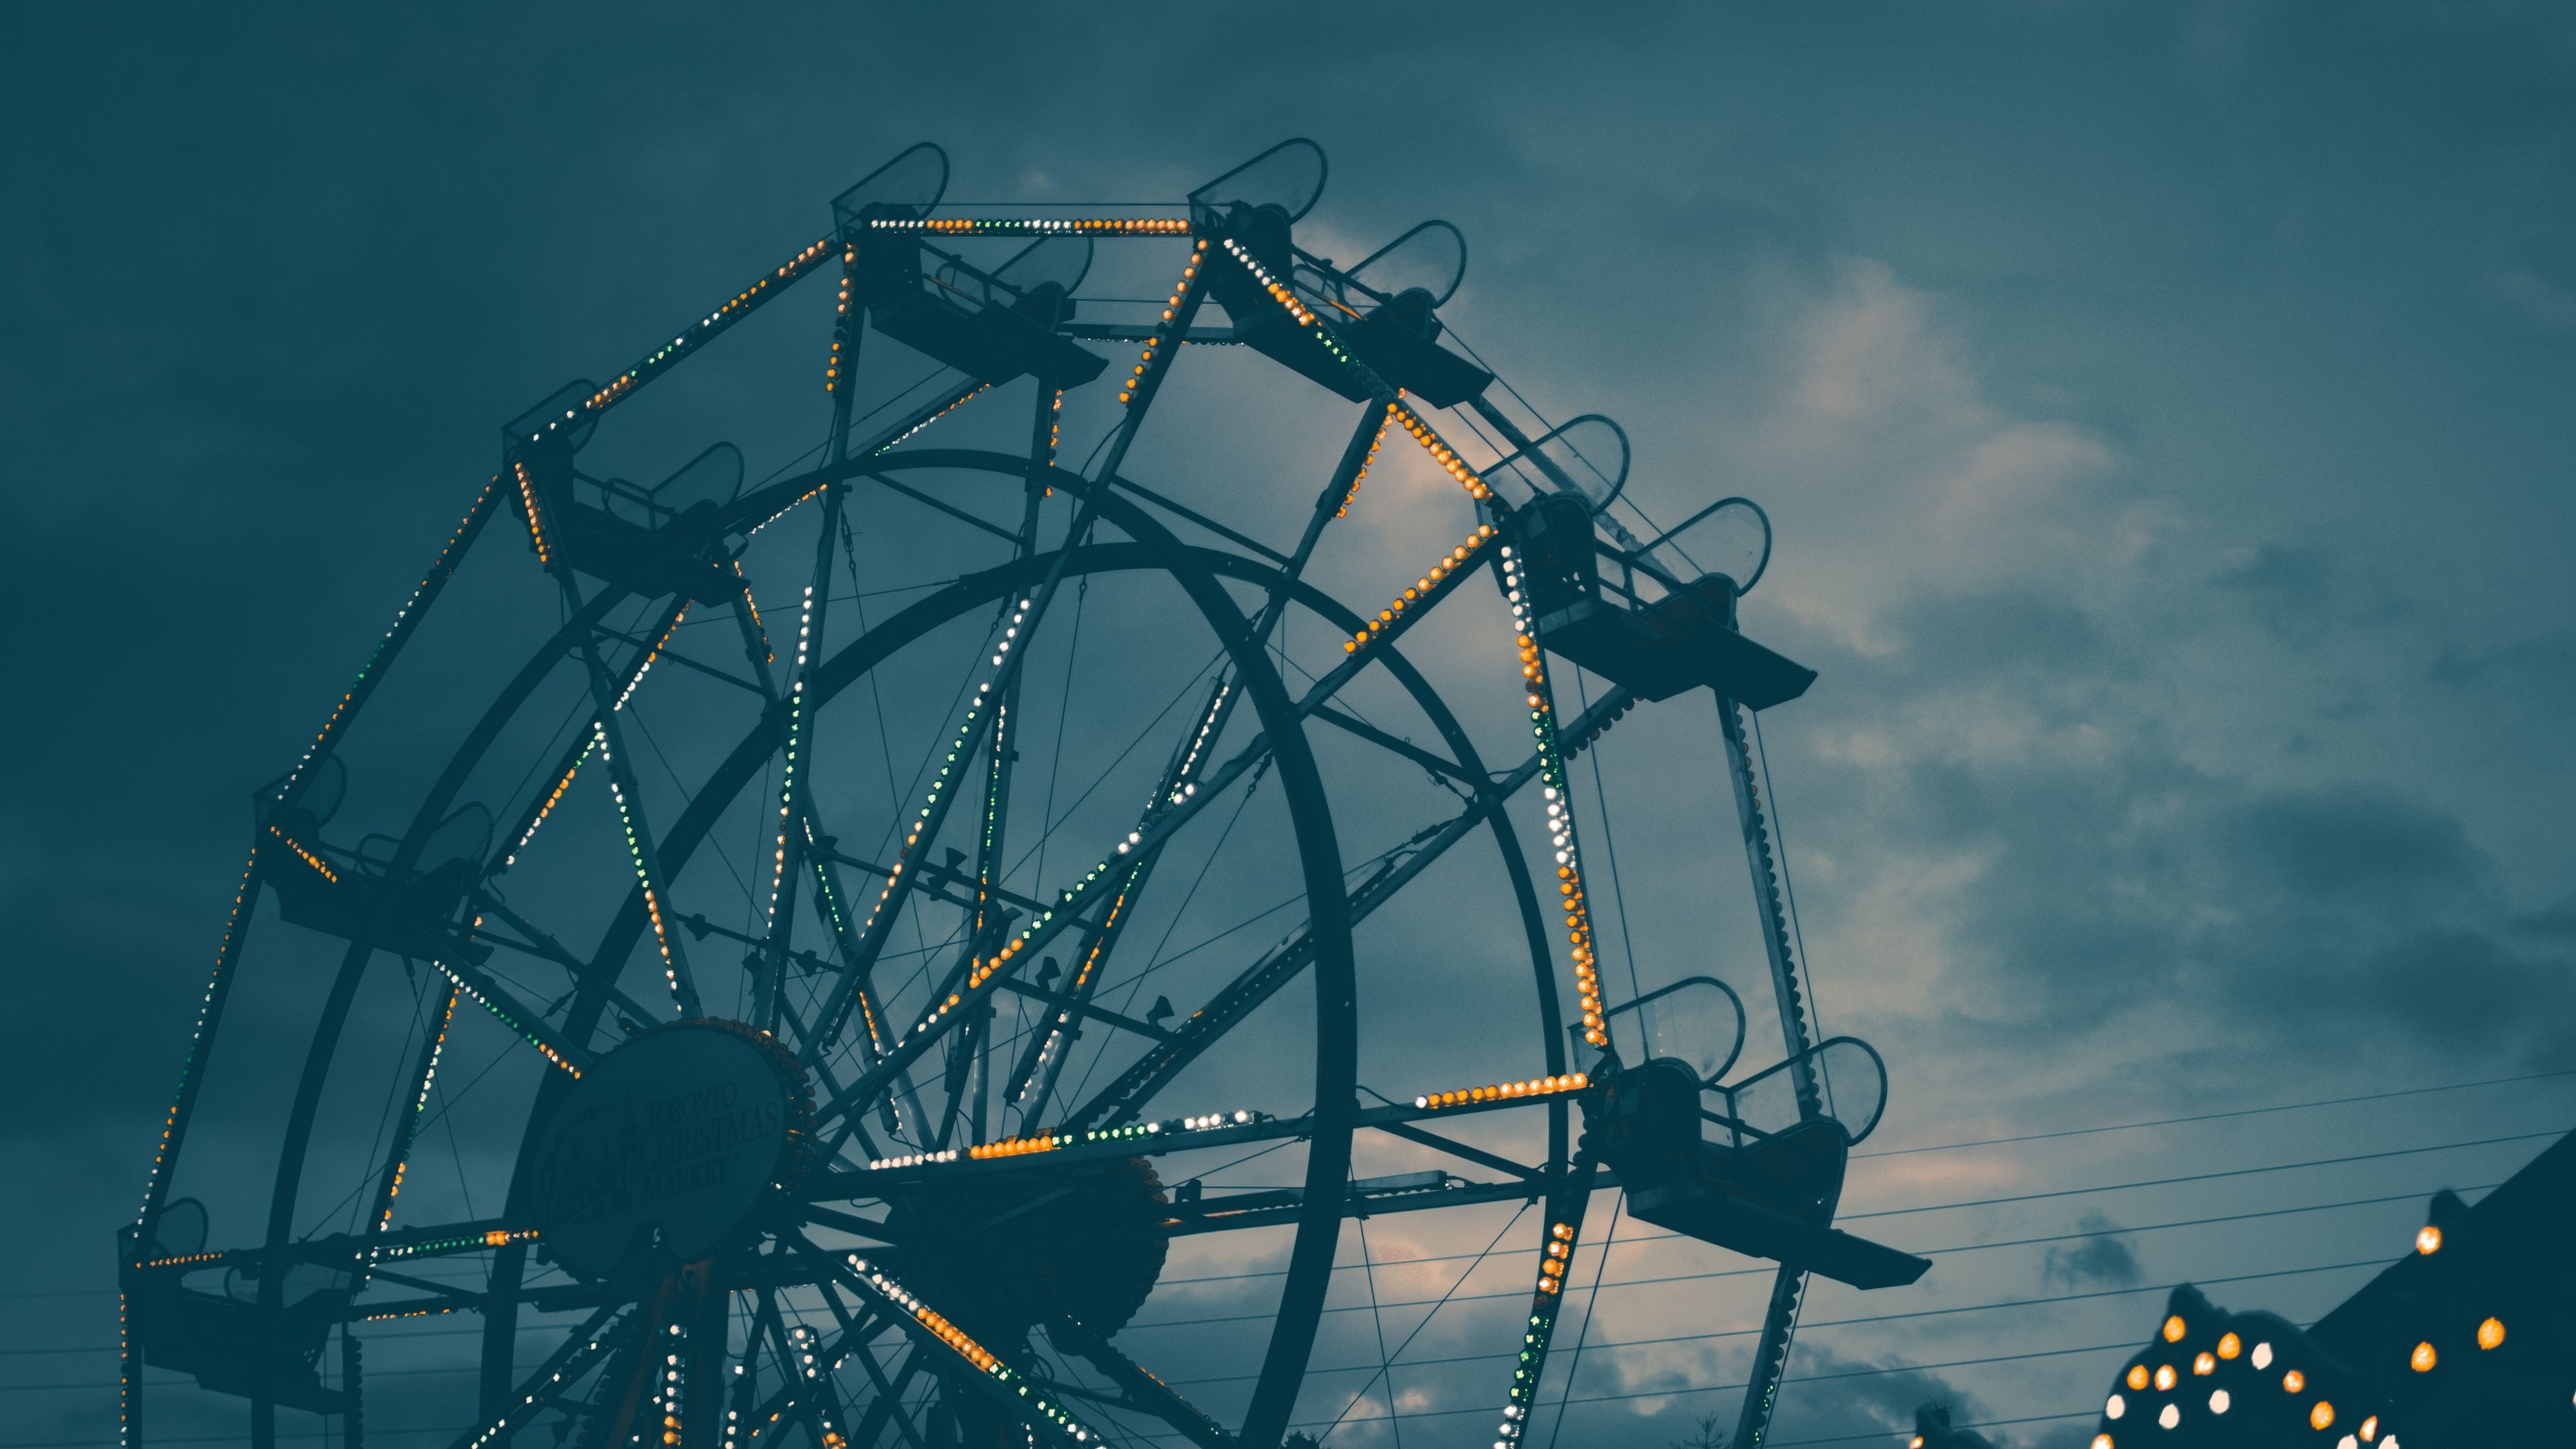 Amusement Park: Ferris wheel, Carnival, New Orleans, A venue with rides and games. 3840x2160 4K Wallpaper.